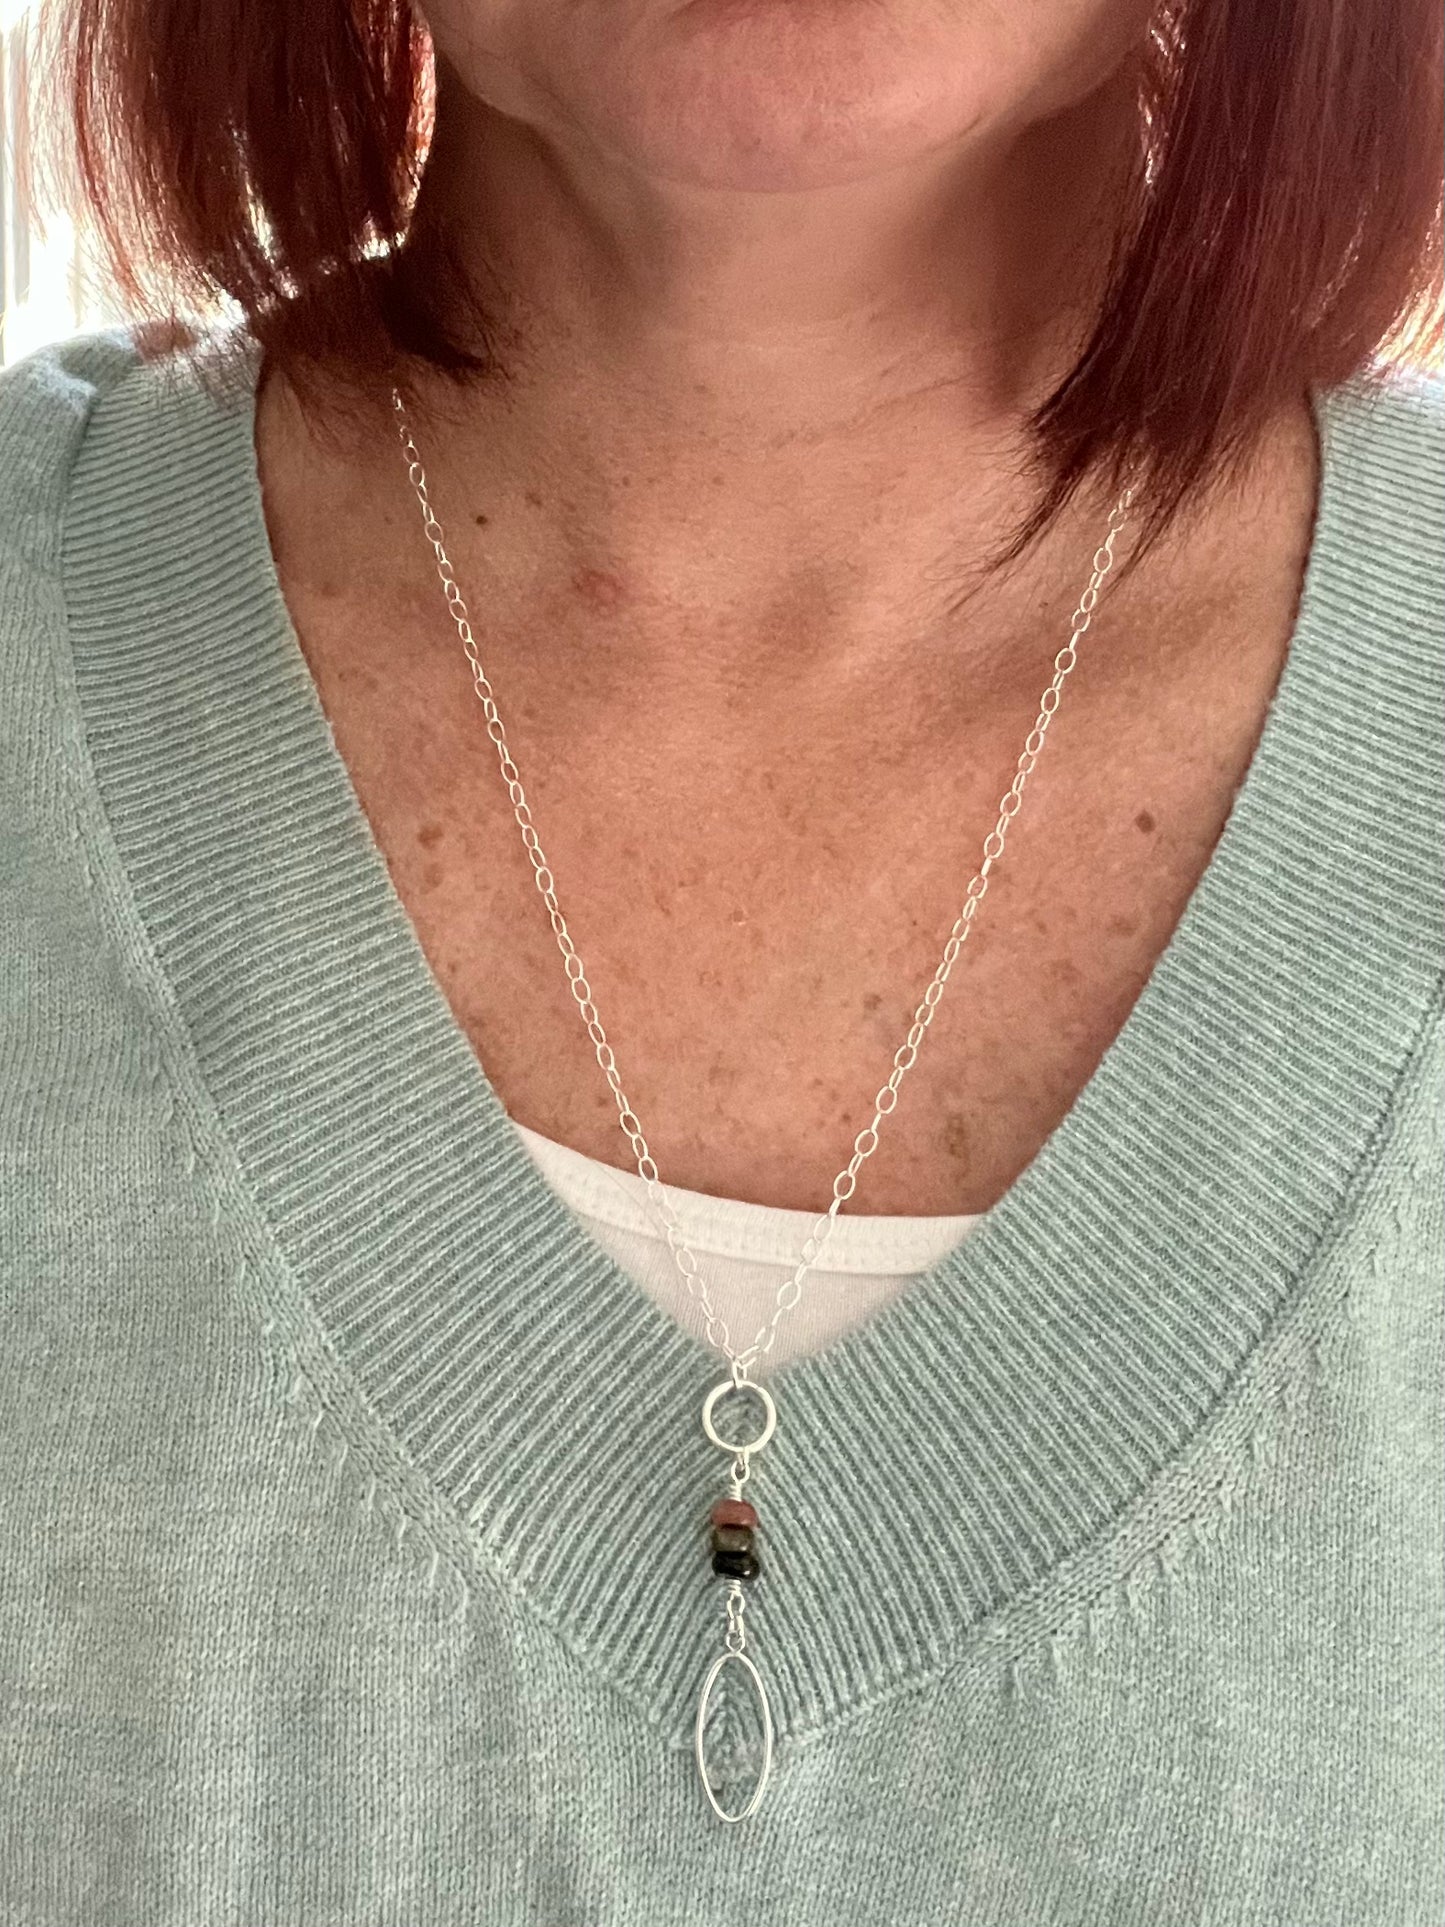 Woman wearing a sage green sweater with a white tank top and a Sterling silver necklace with three Tourmaline rondelles and a flat silver oval at the bottom